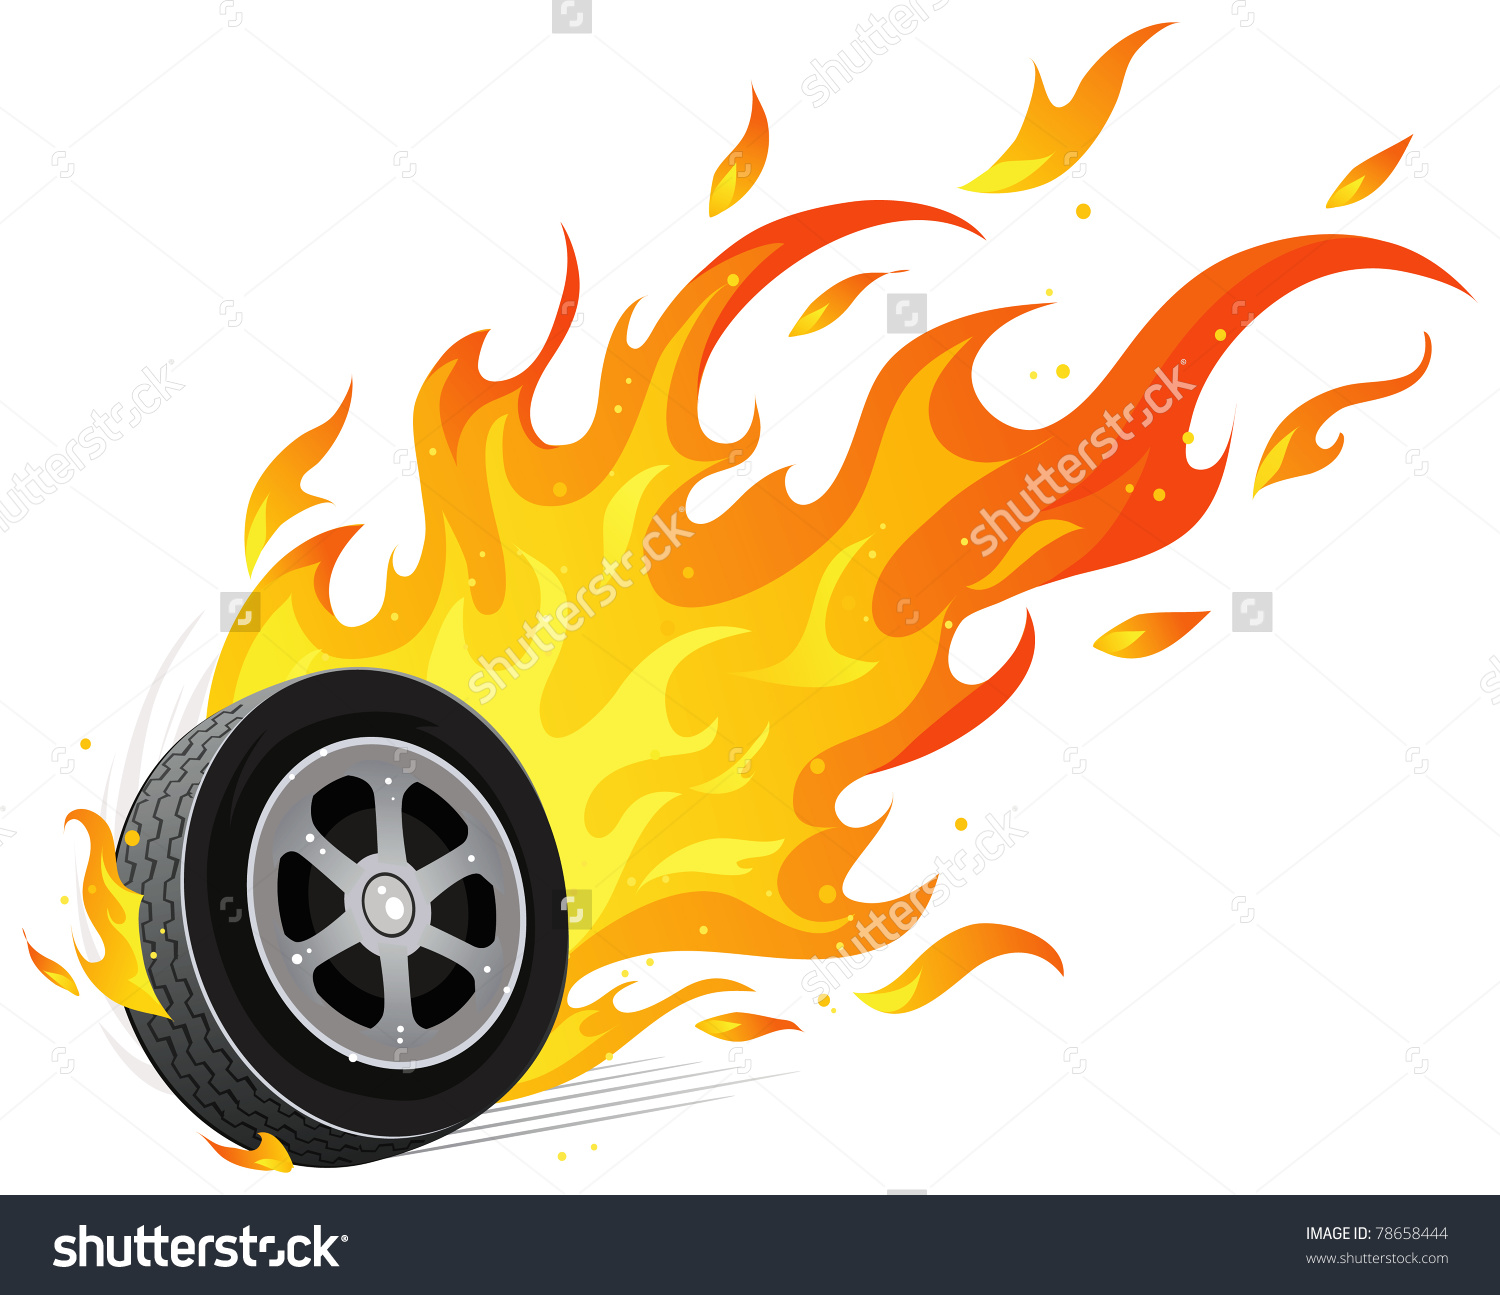 Wheel of fire clipart - Clipground